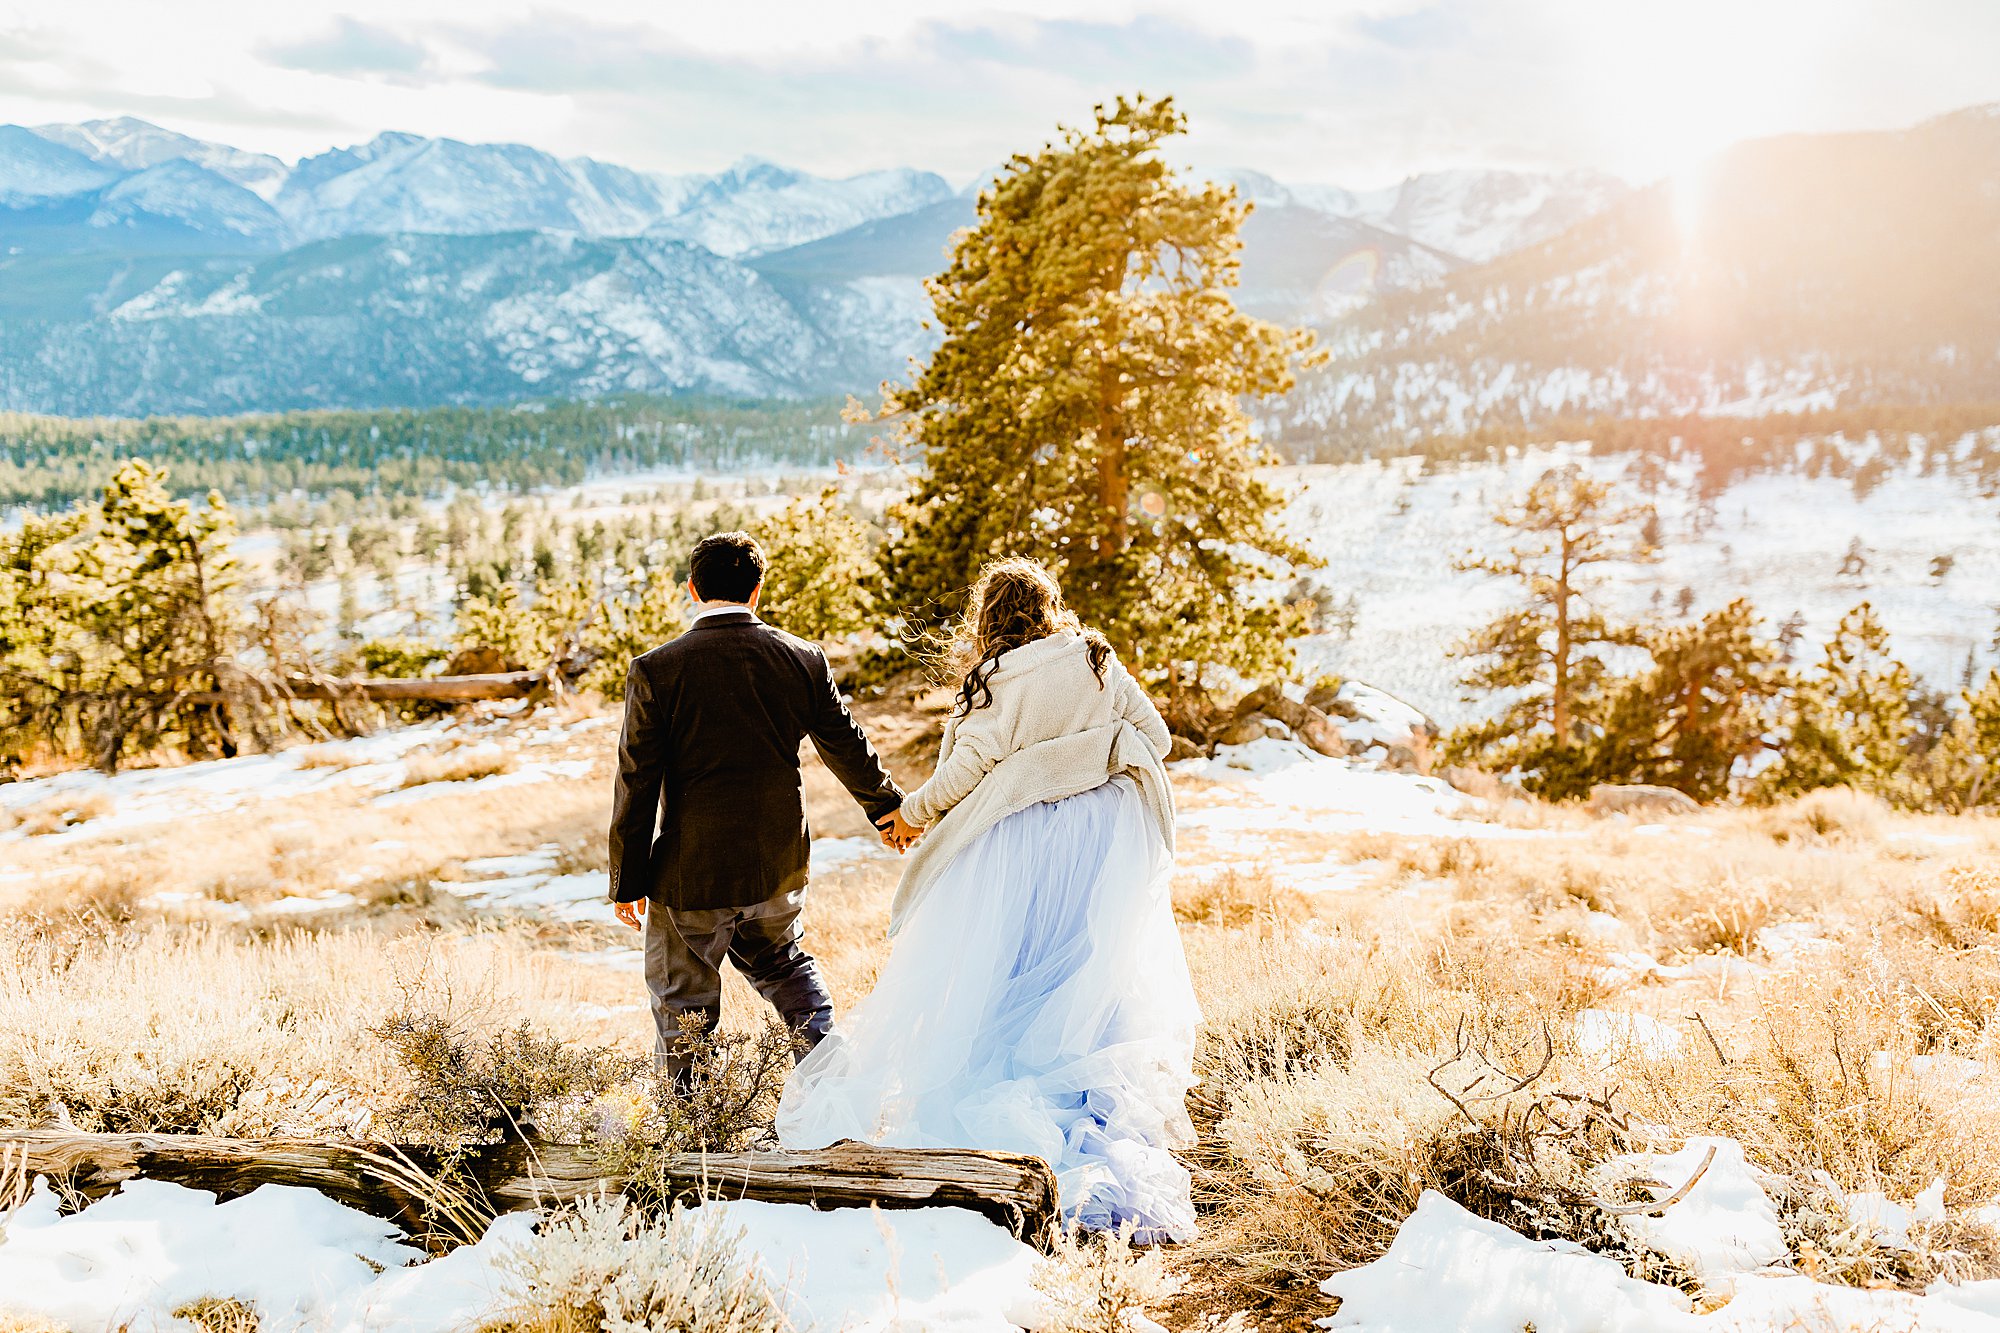 Couple explores rocky mountain national park for their winter elopement with gorgeous nature views surrounding them, photo by lauren casino photography